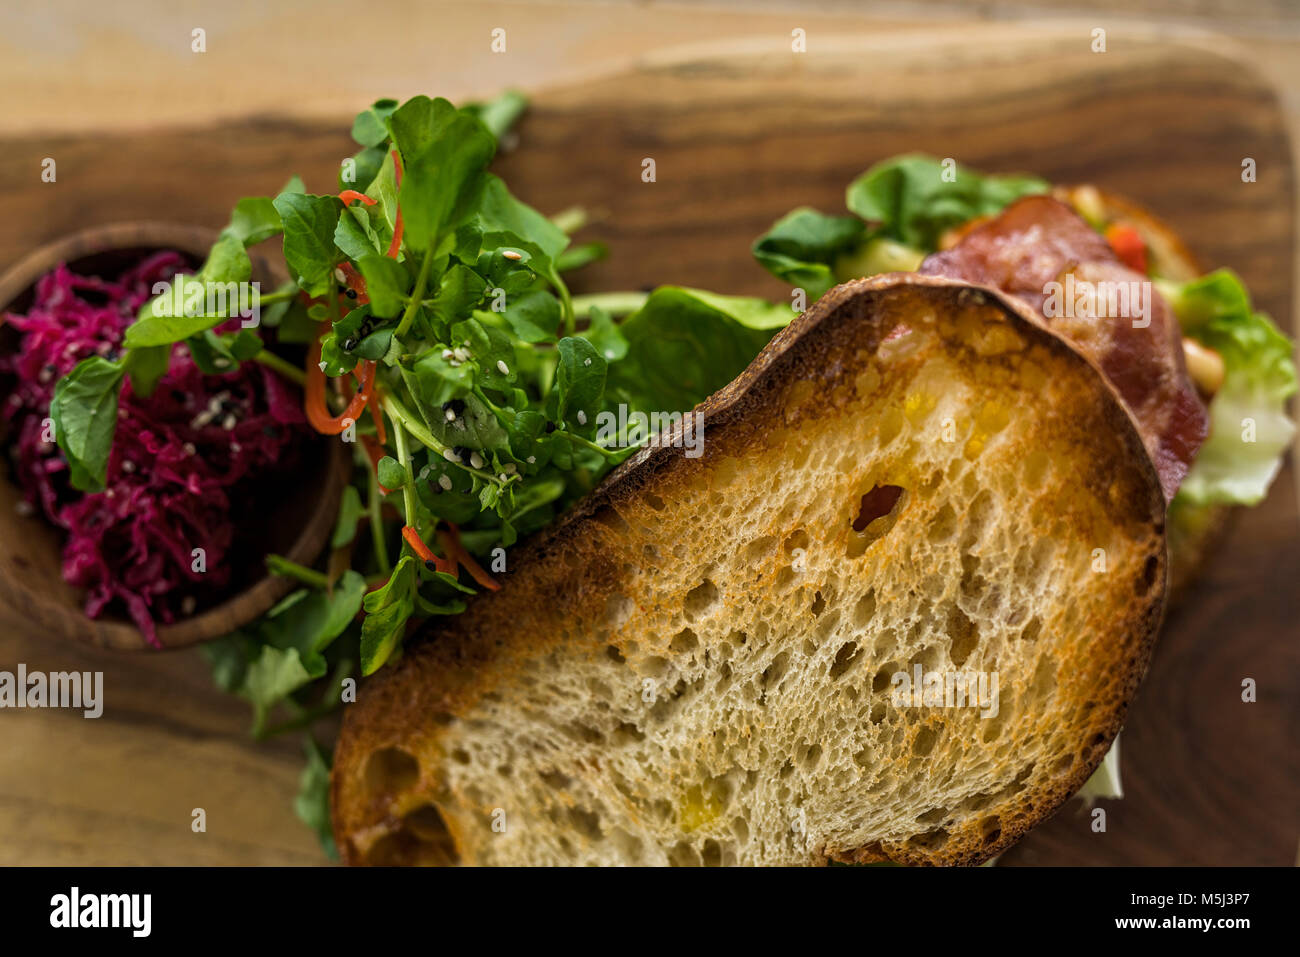 Detail of crusty bread with green salad and beetroot Stock Photo